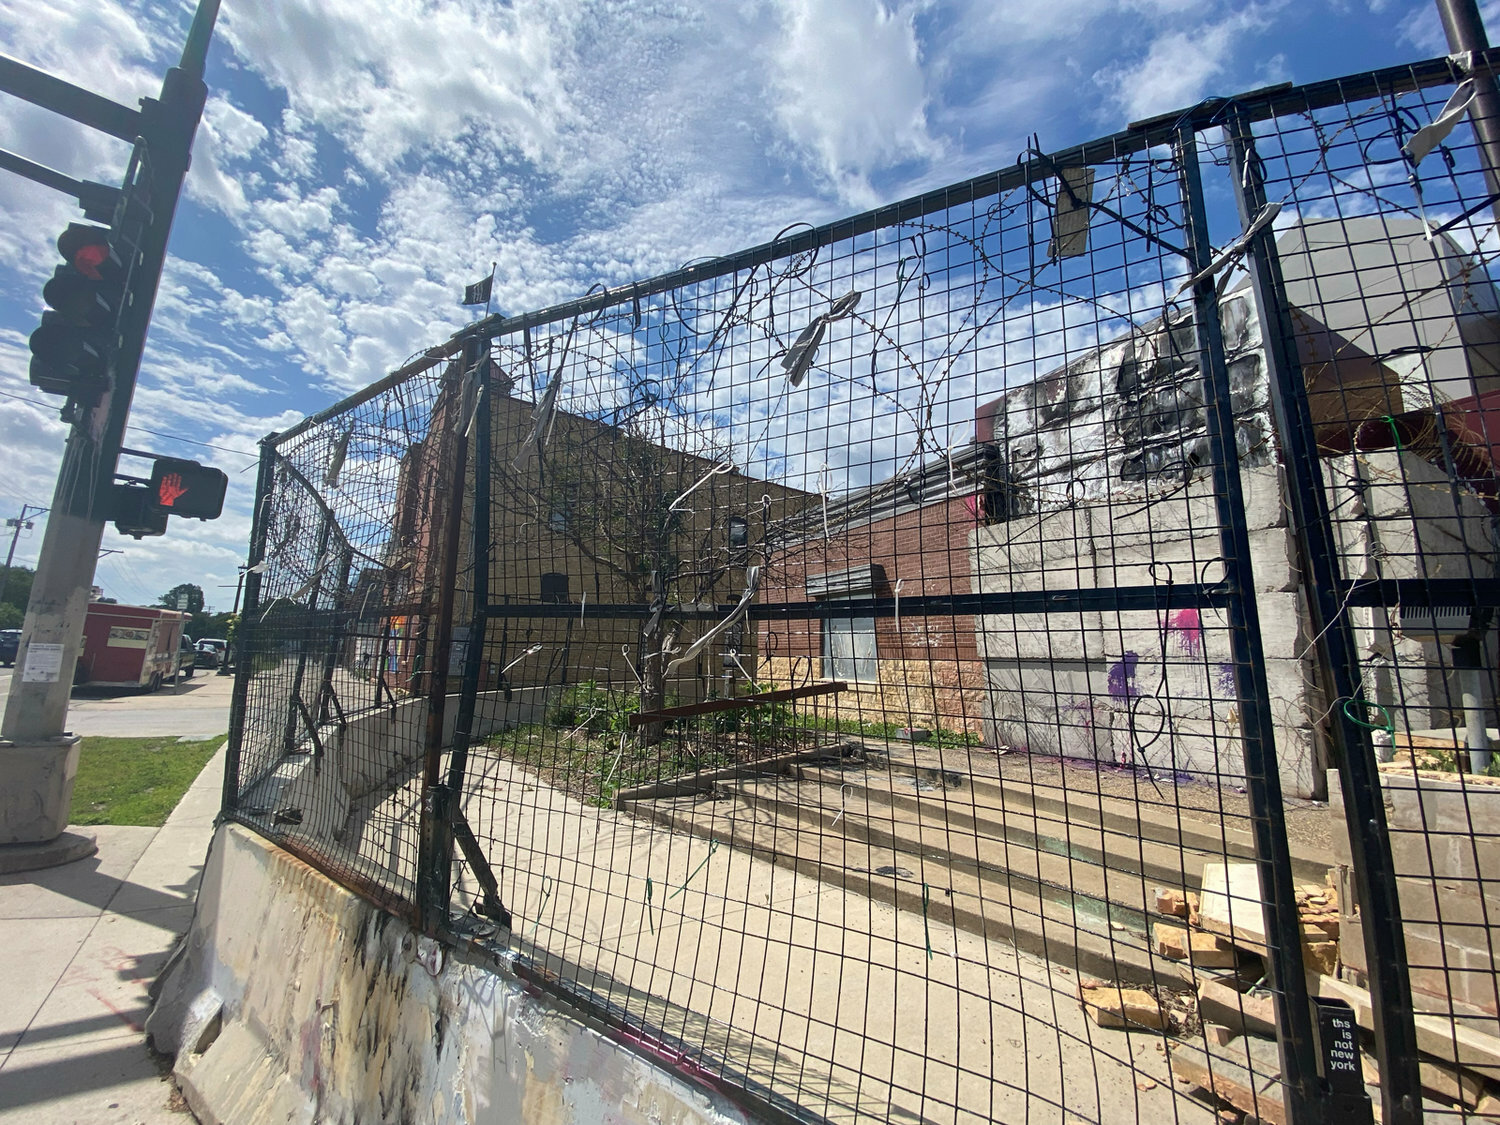 Nearly three years later, the 3rd Precinct building at Lake and Minnehaha remains fenced, barricaded and unused.